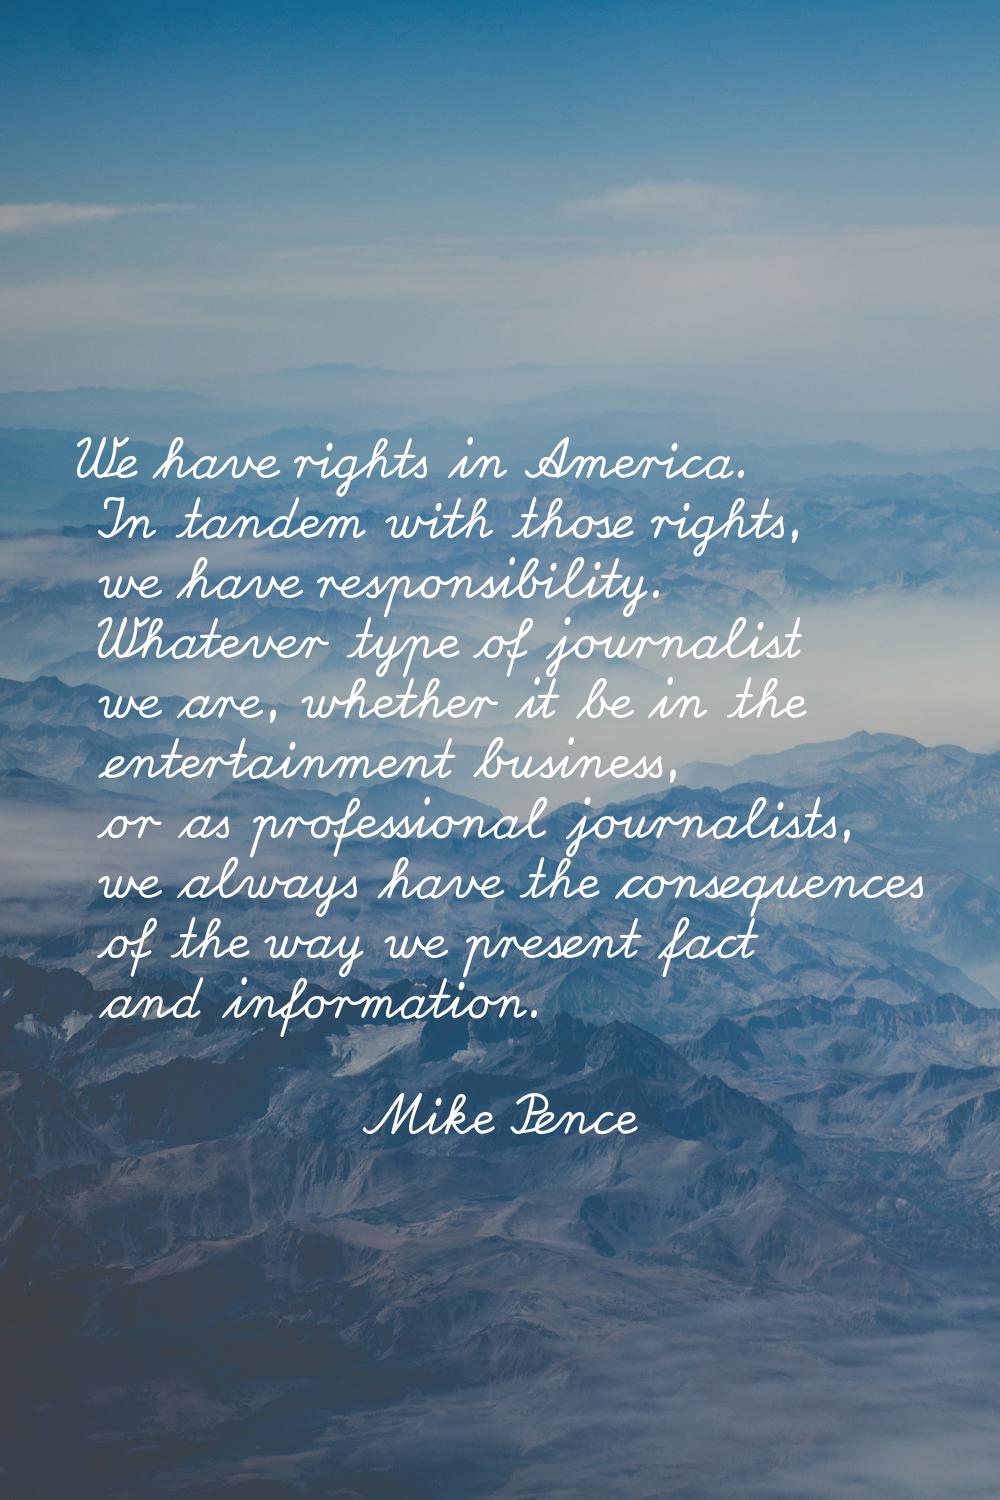 We have rights in America. In tandem with those rights, we have responsibility. Whatever type of jo